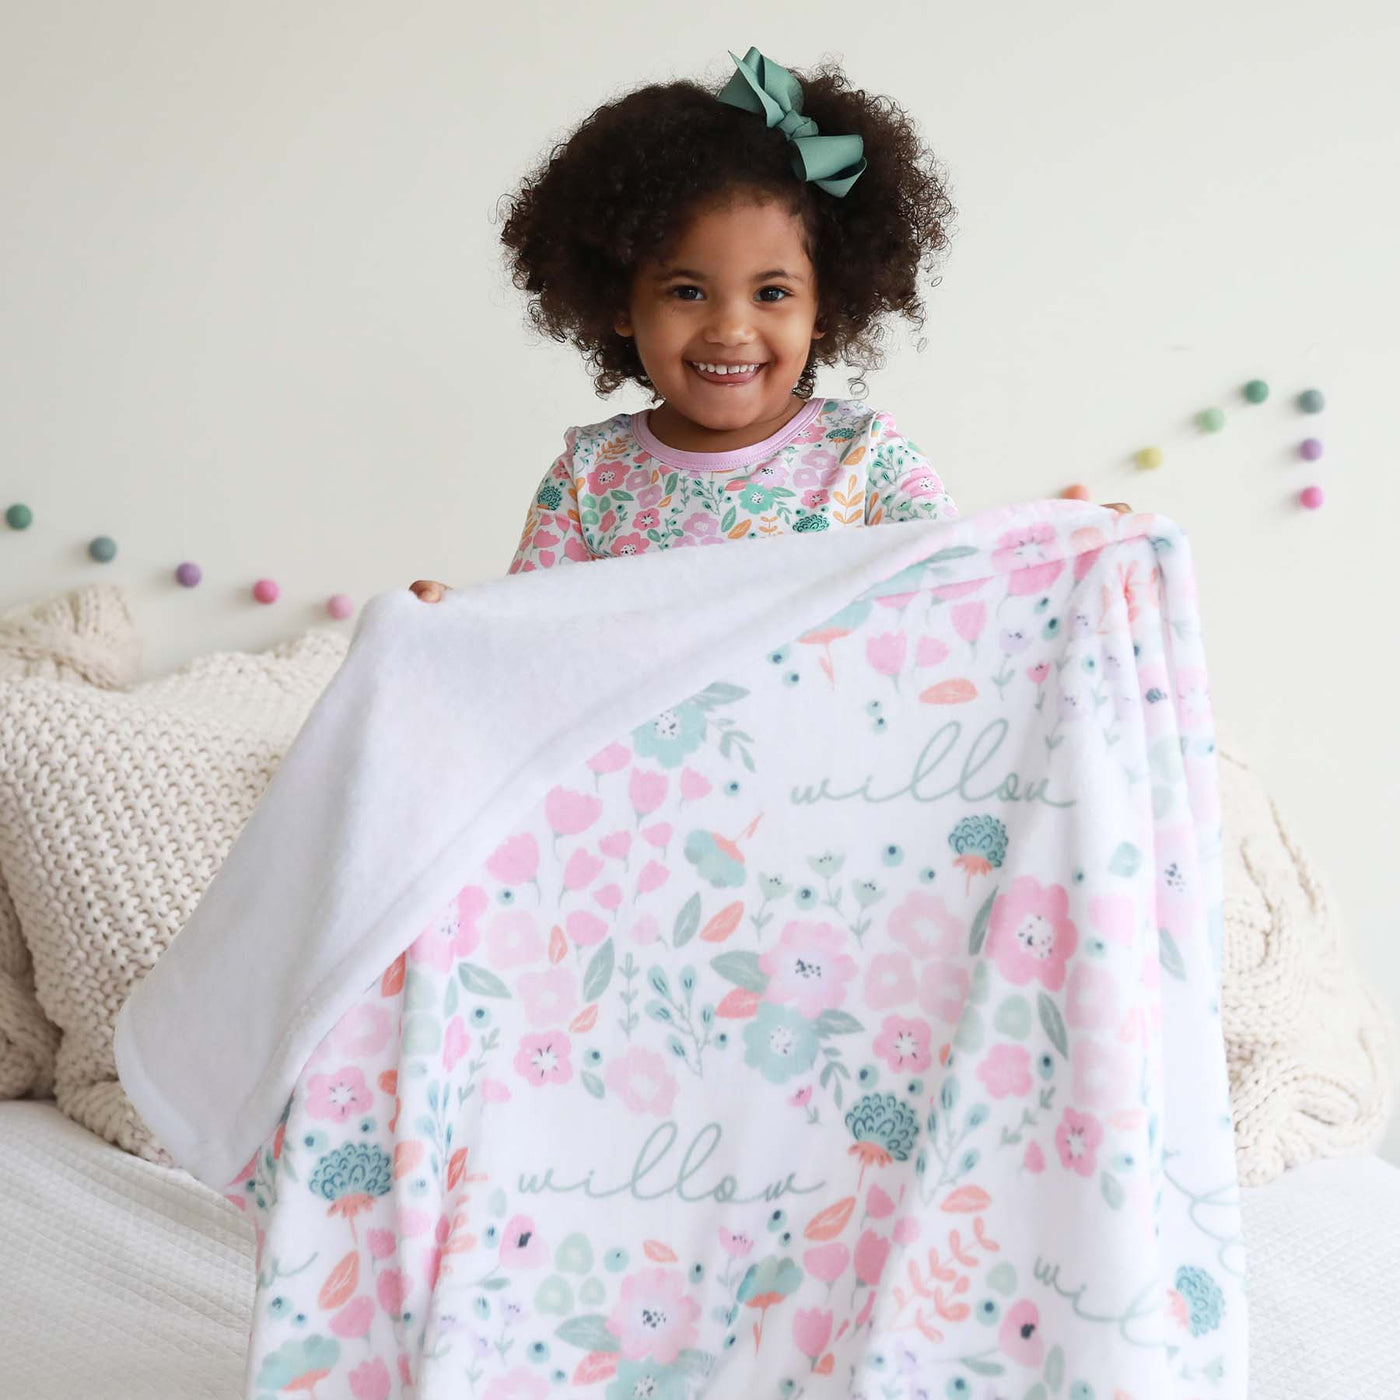 willow's floral personalized blanket for kids 